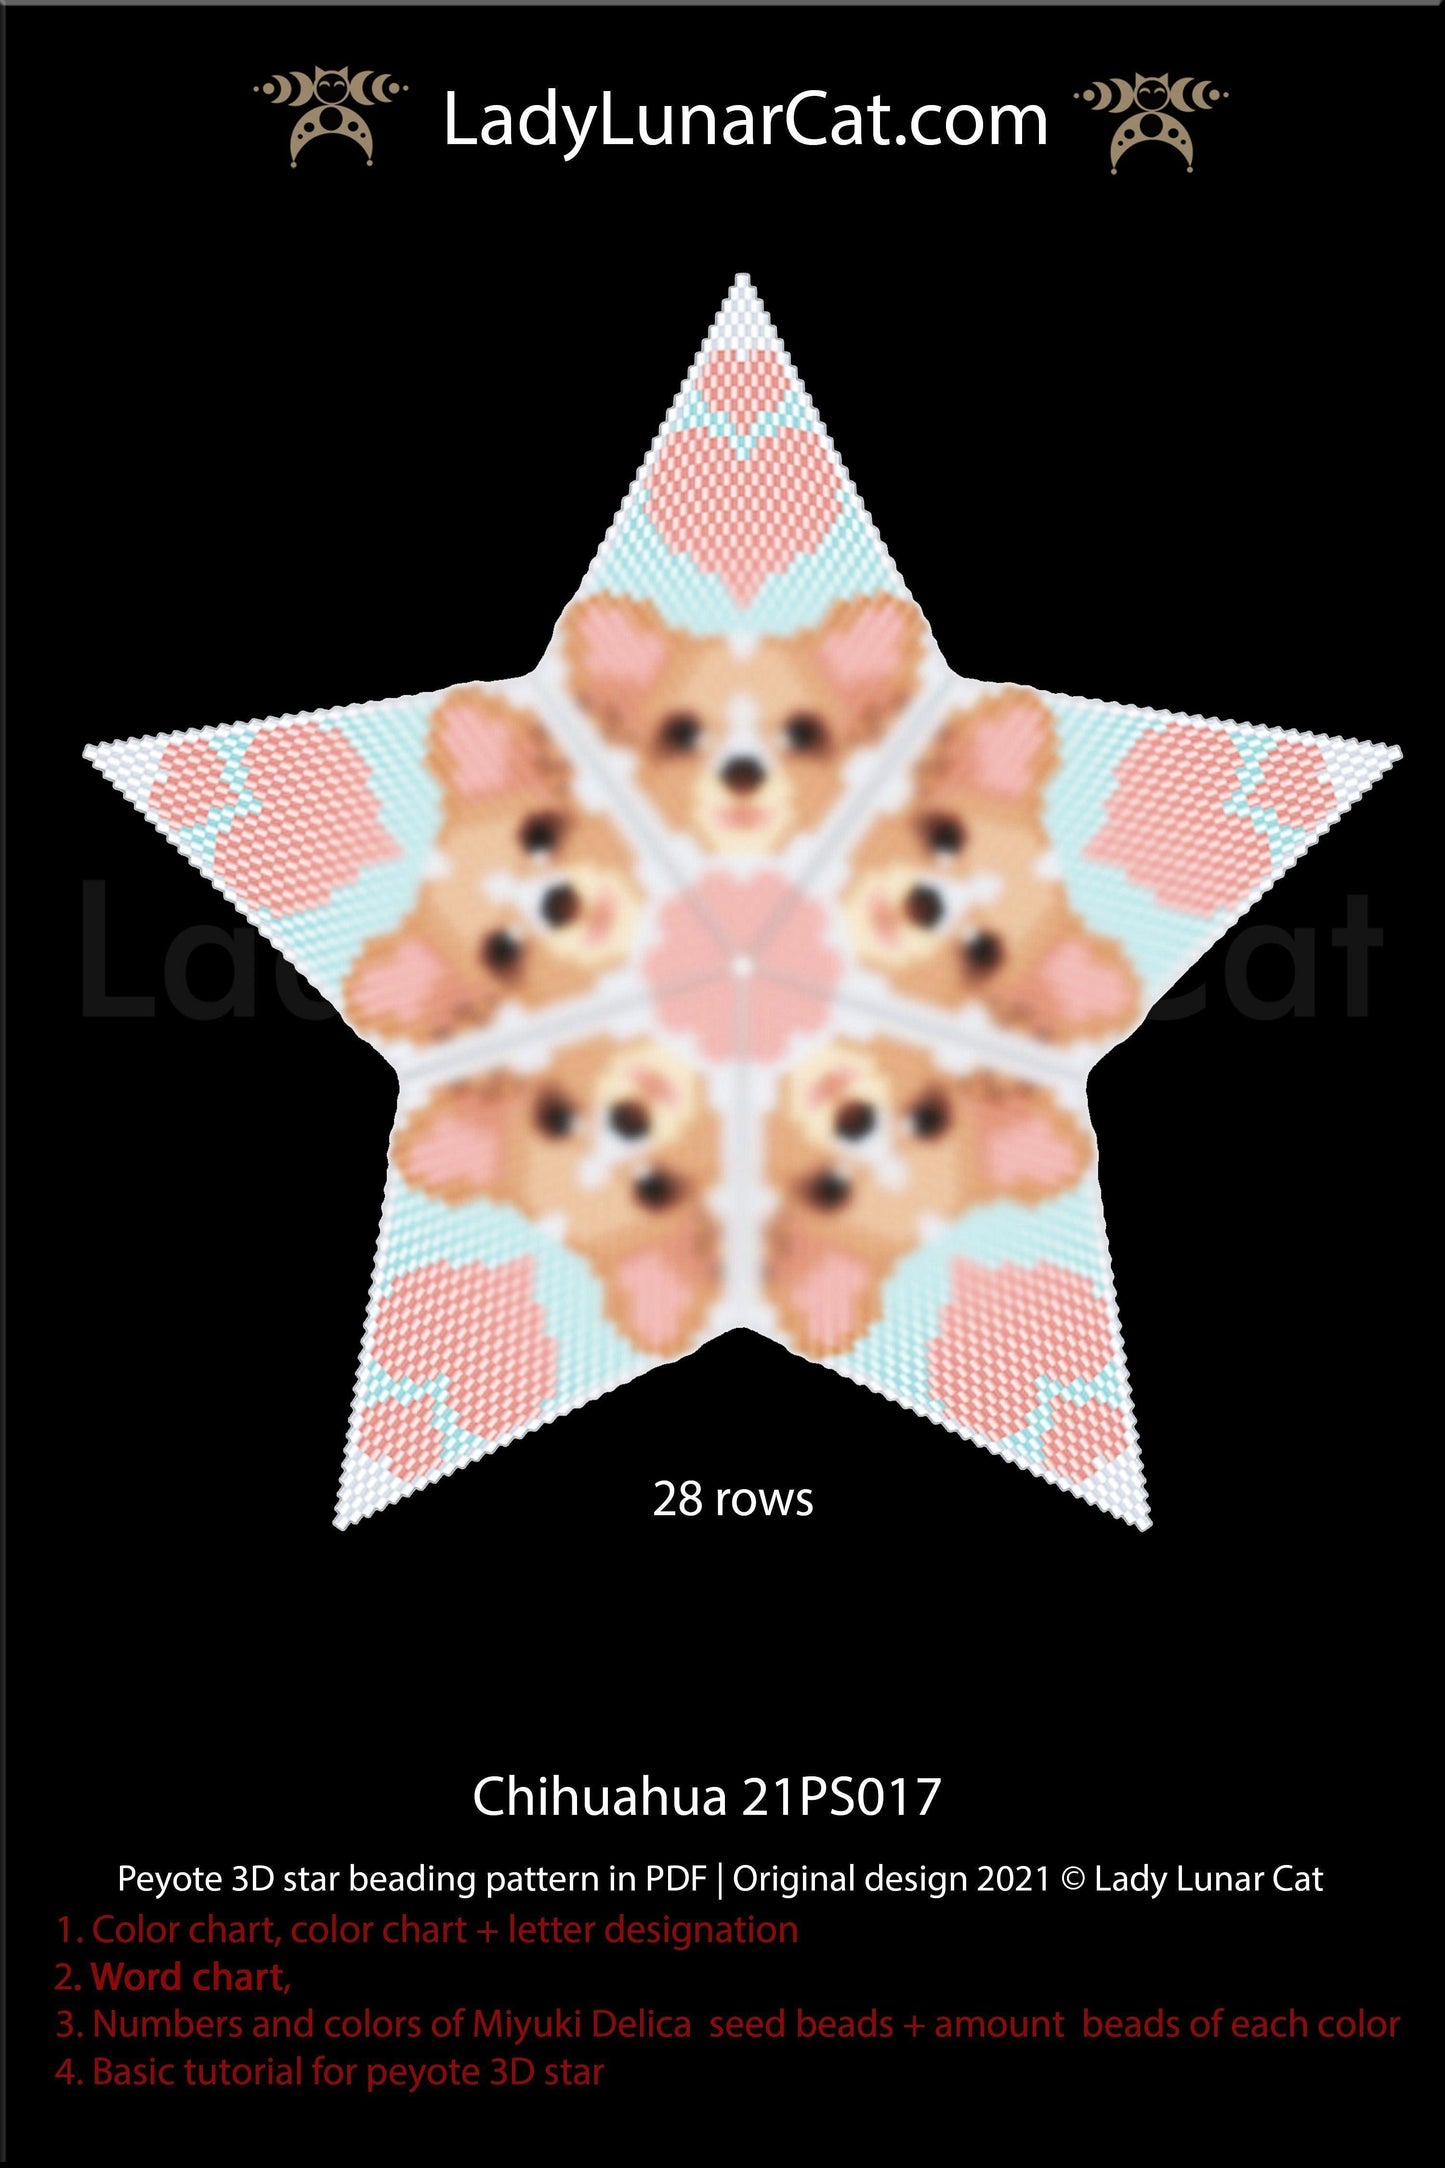 Beaded star pattern for beading - Chihuahua 21PS017 LadyLunarCat